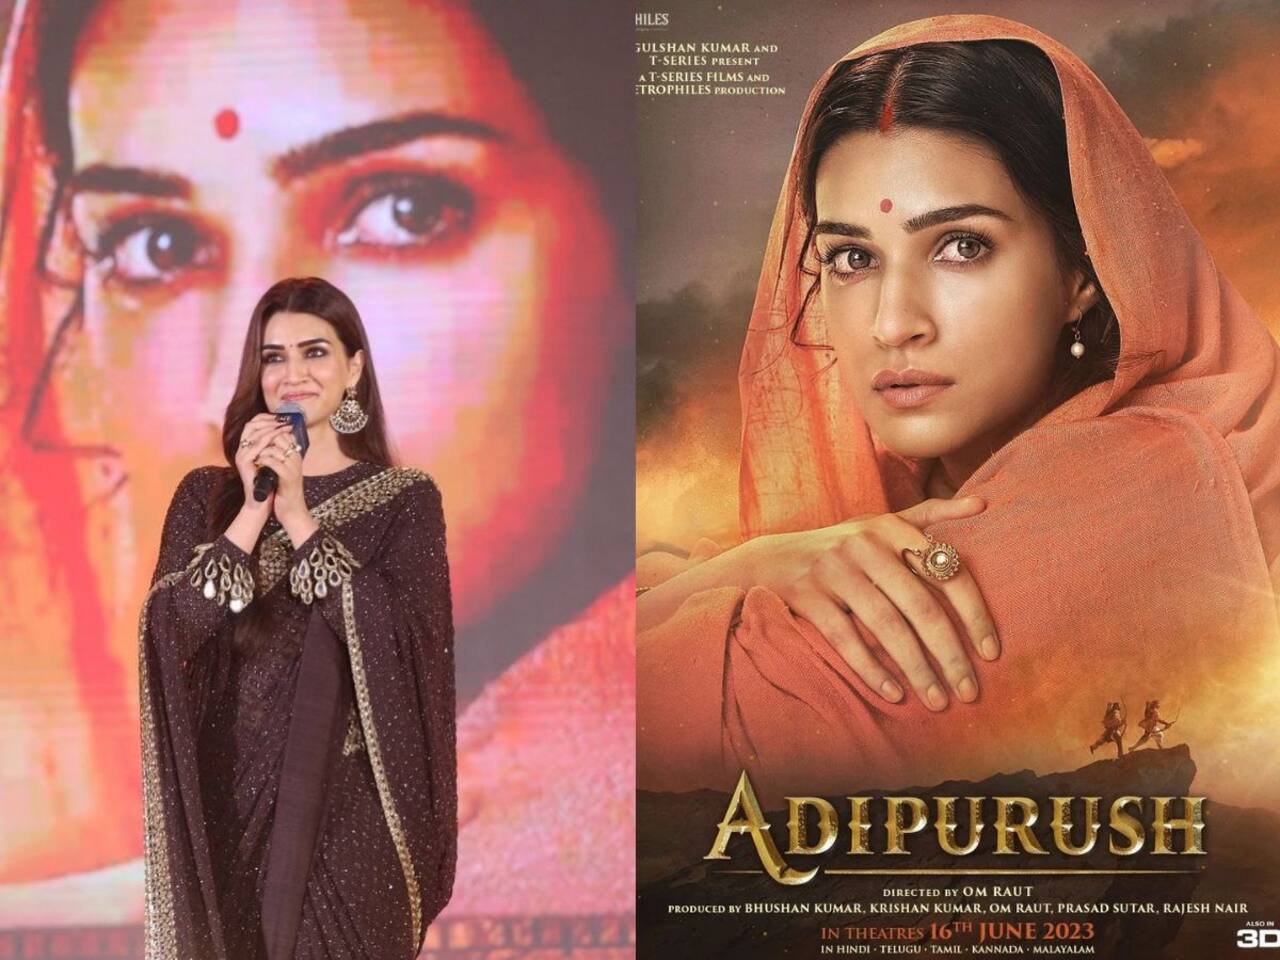 Kriti Sanon expresses gratitude for all the love on Adipurush final trailer after Om Raut kiss controversy